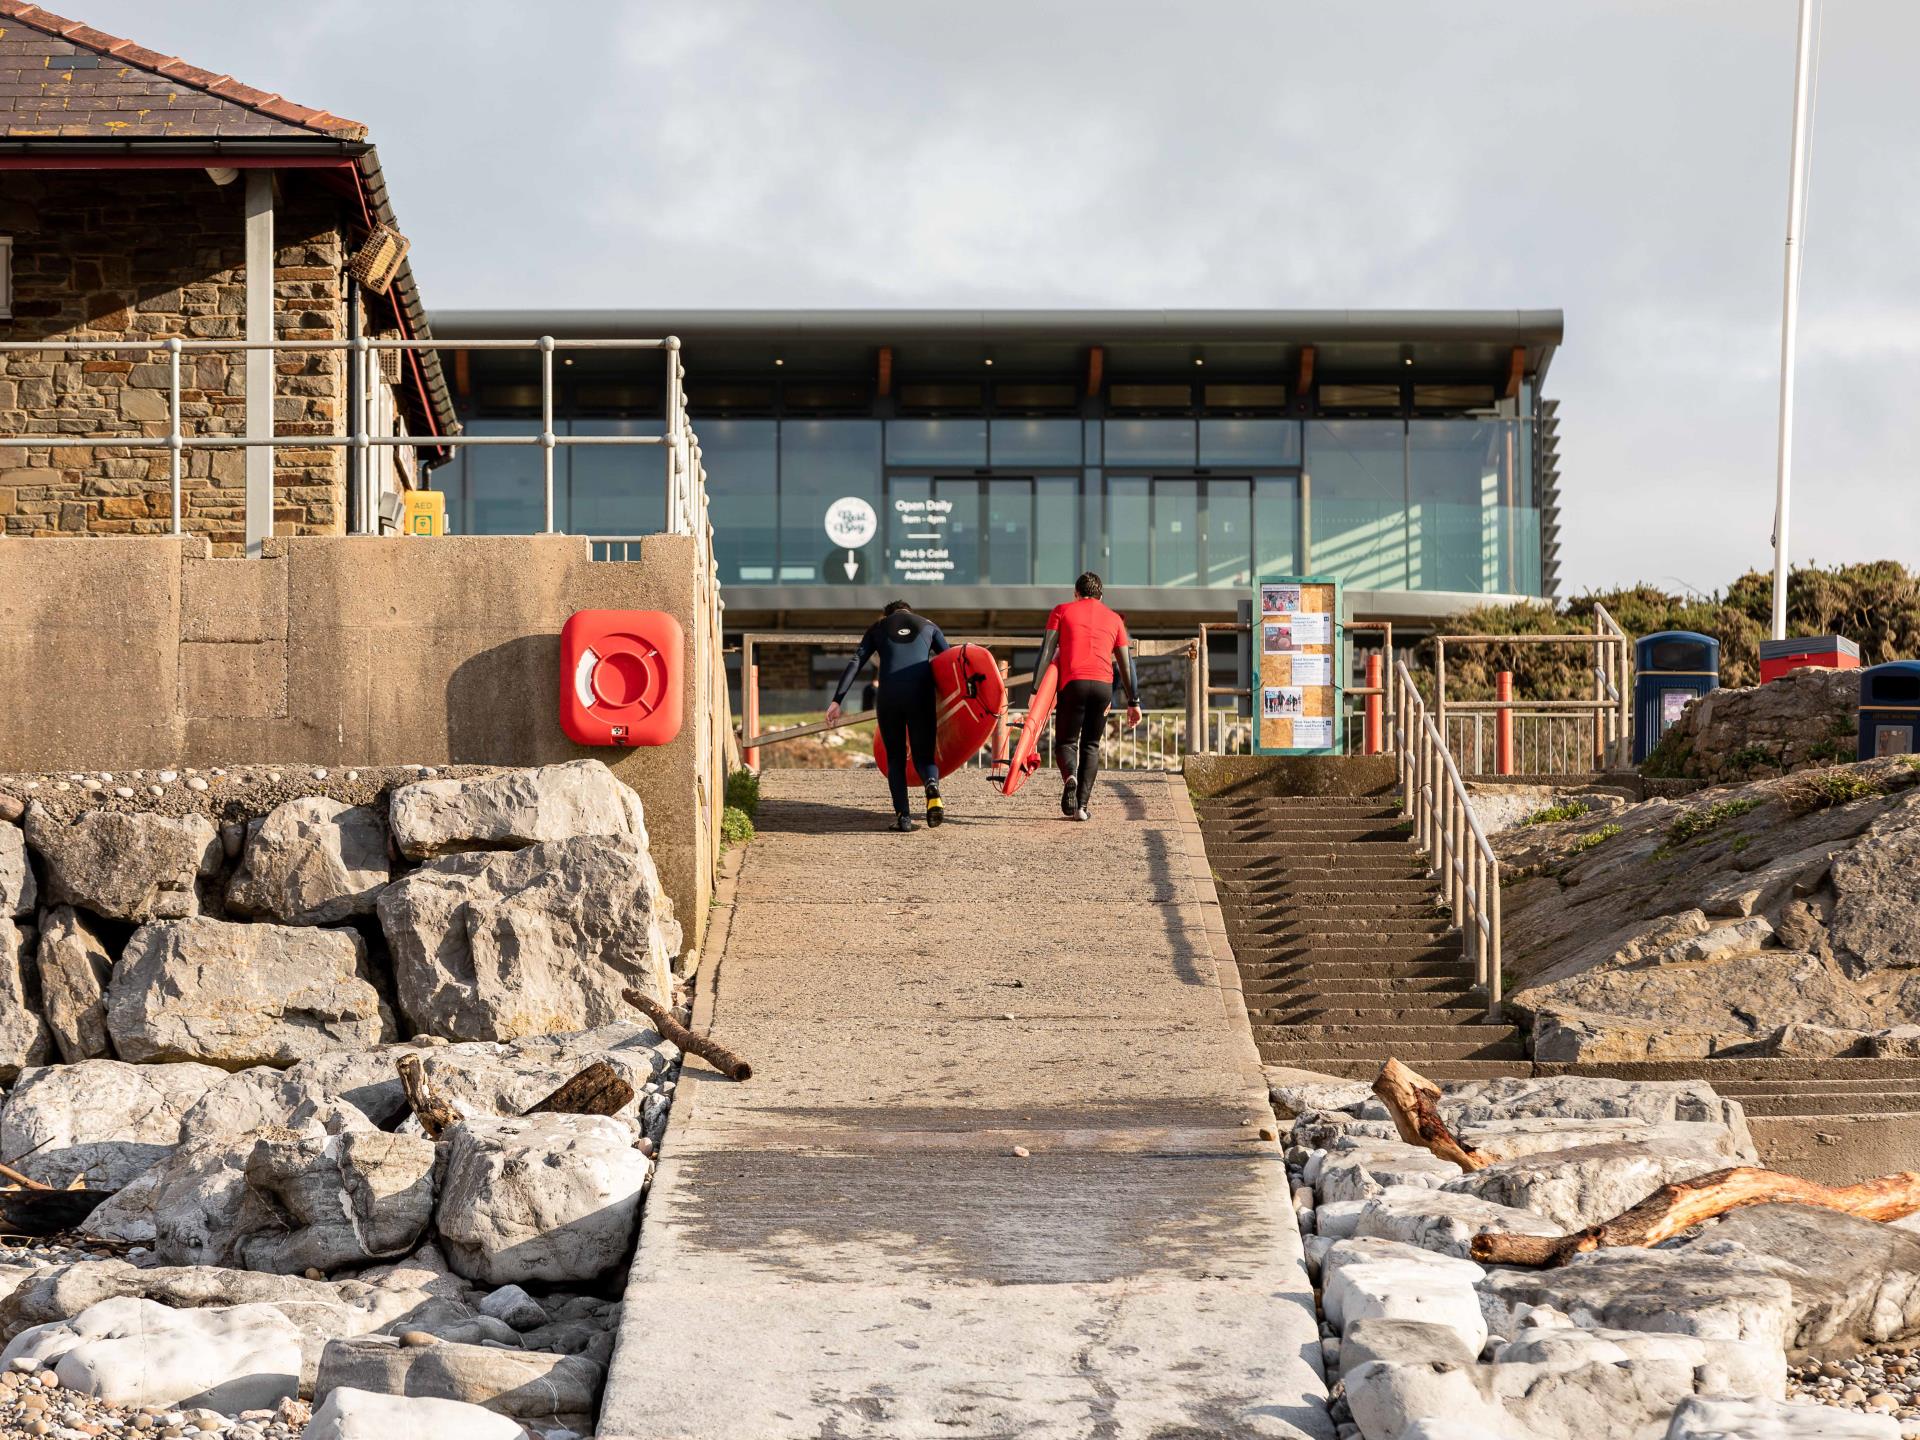 Lifeguard Station at Rest Bay, Porthcawl